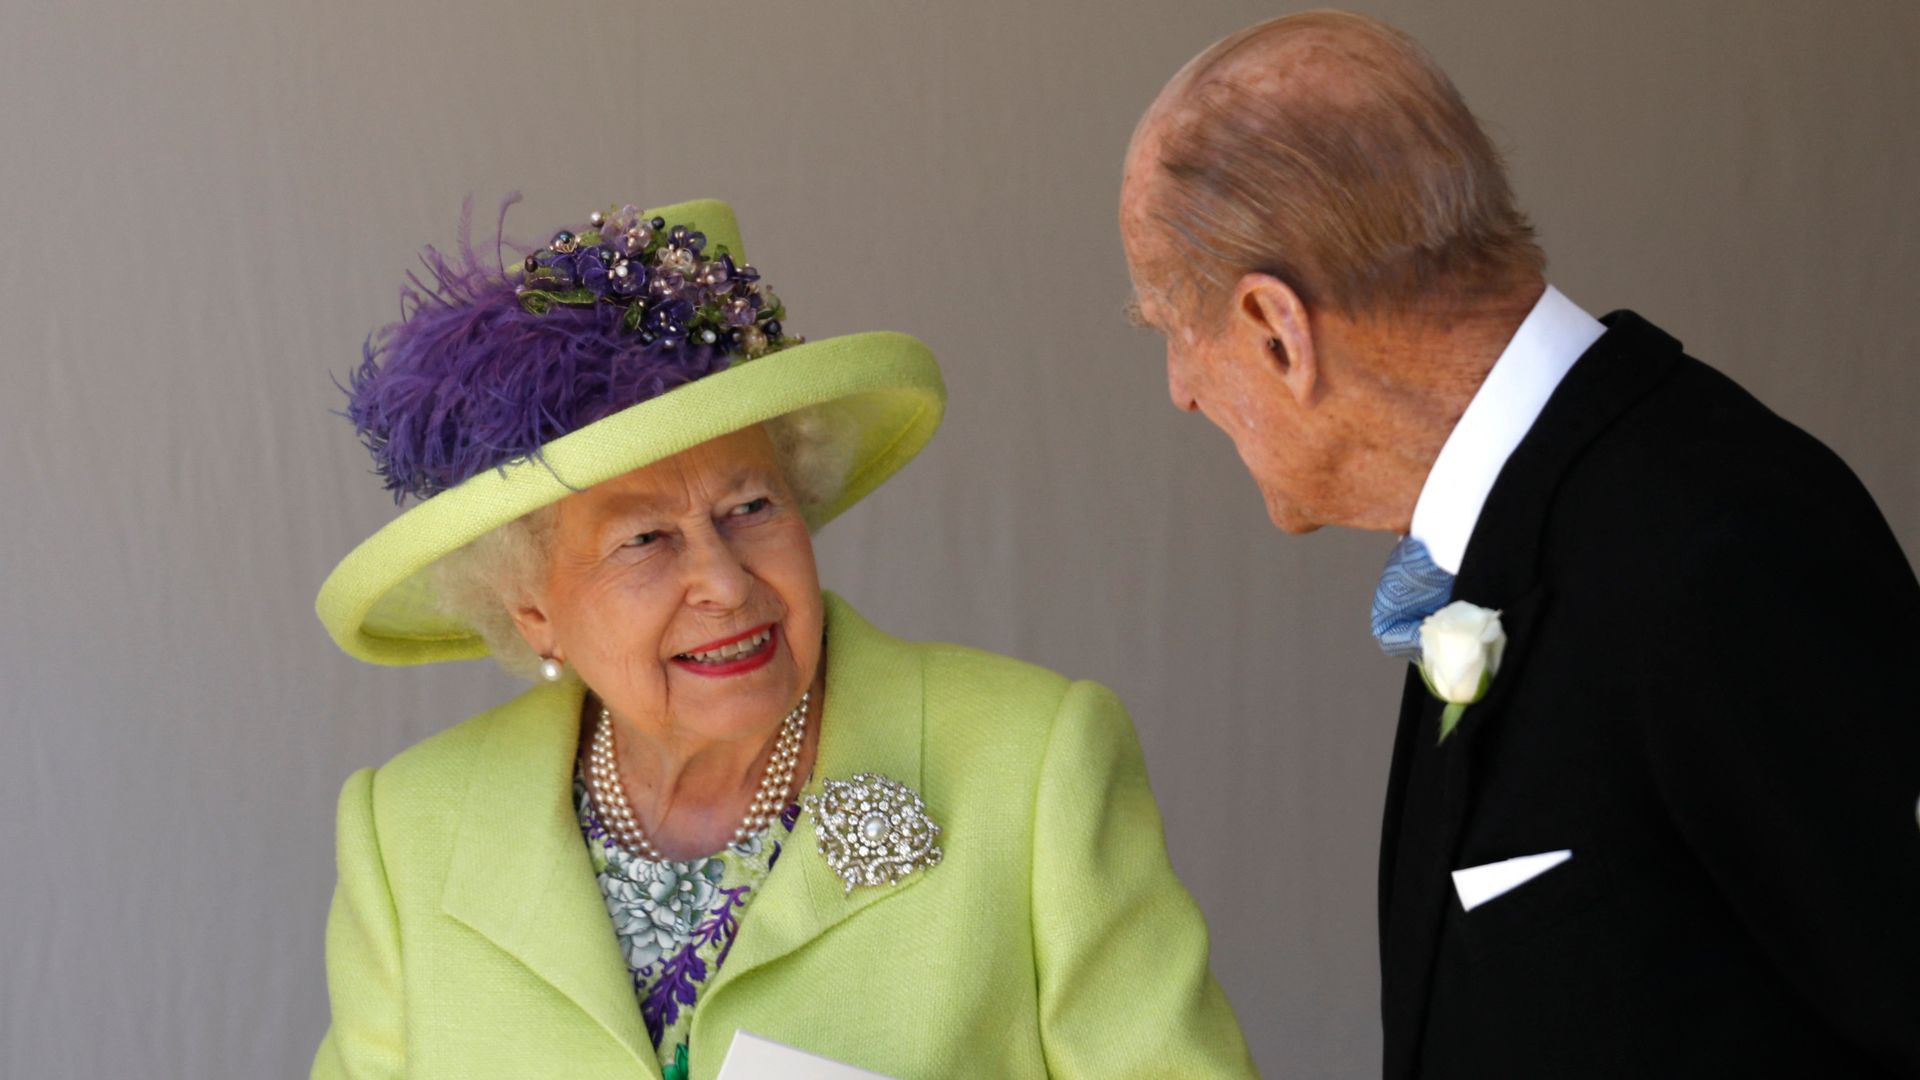 The final few words the late Queen wrote in last note to her beloved Prince Philip